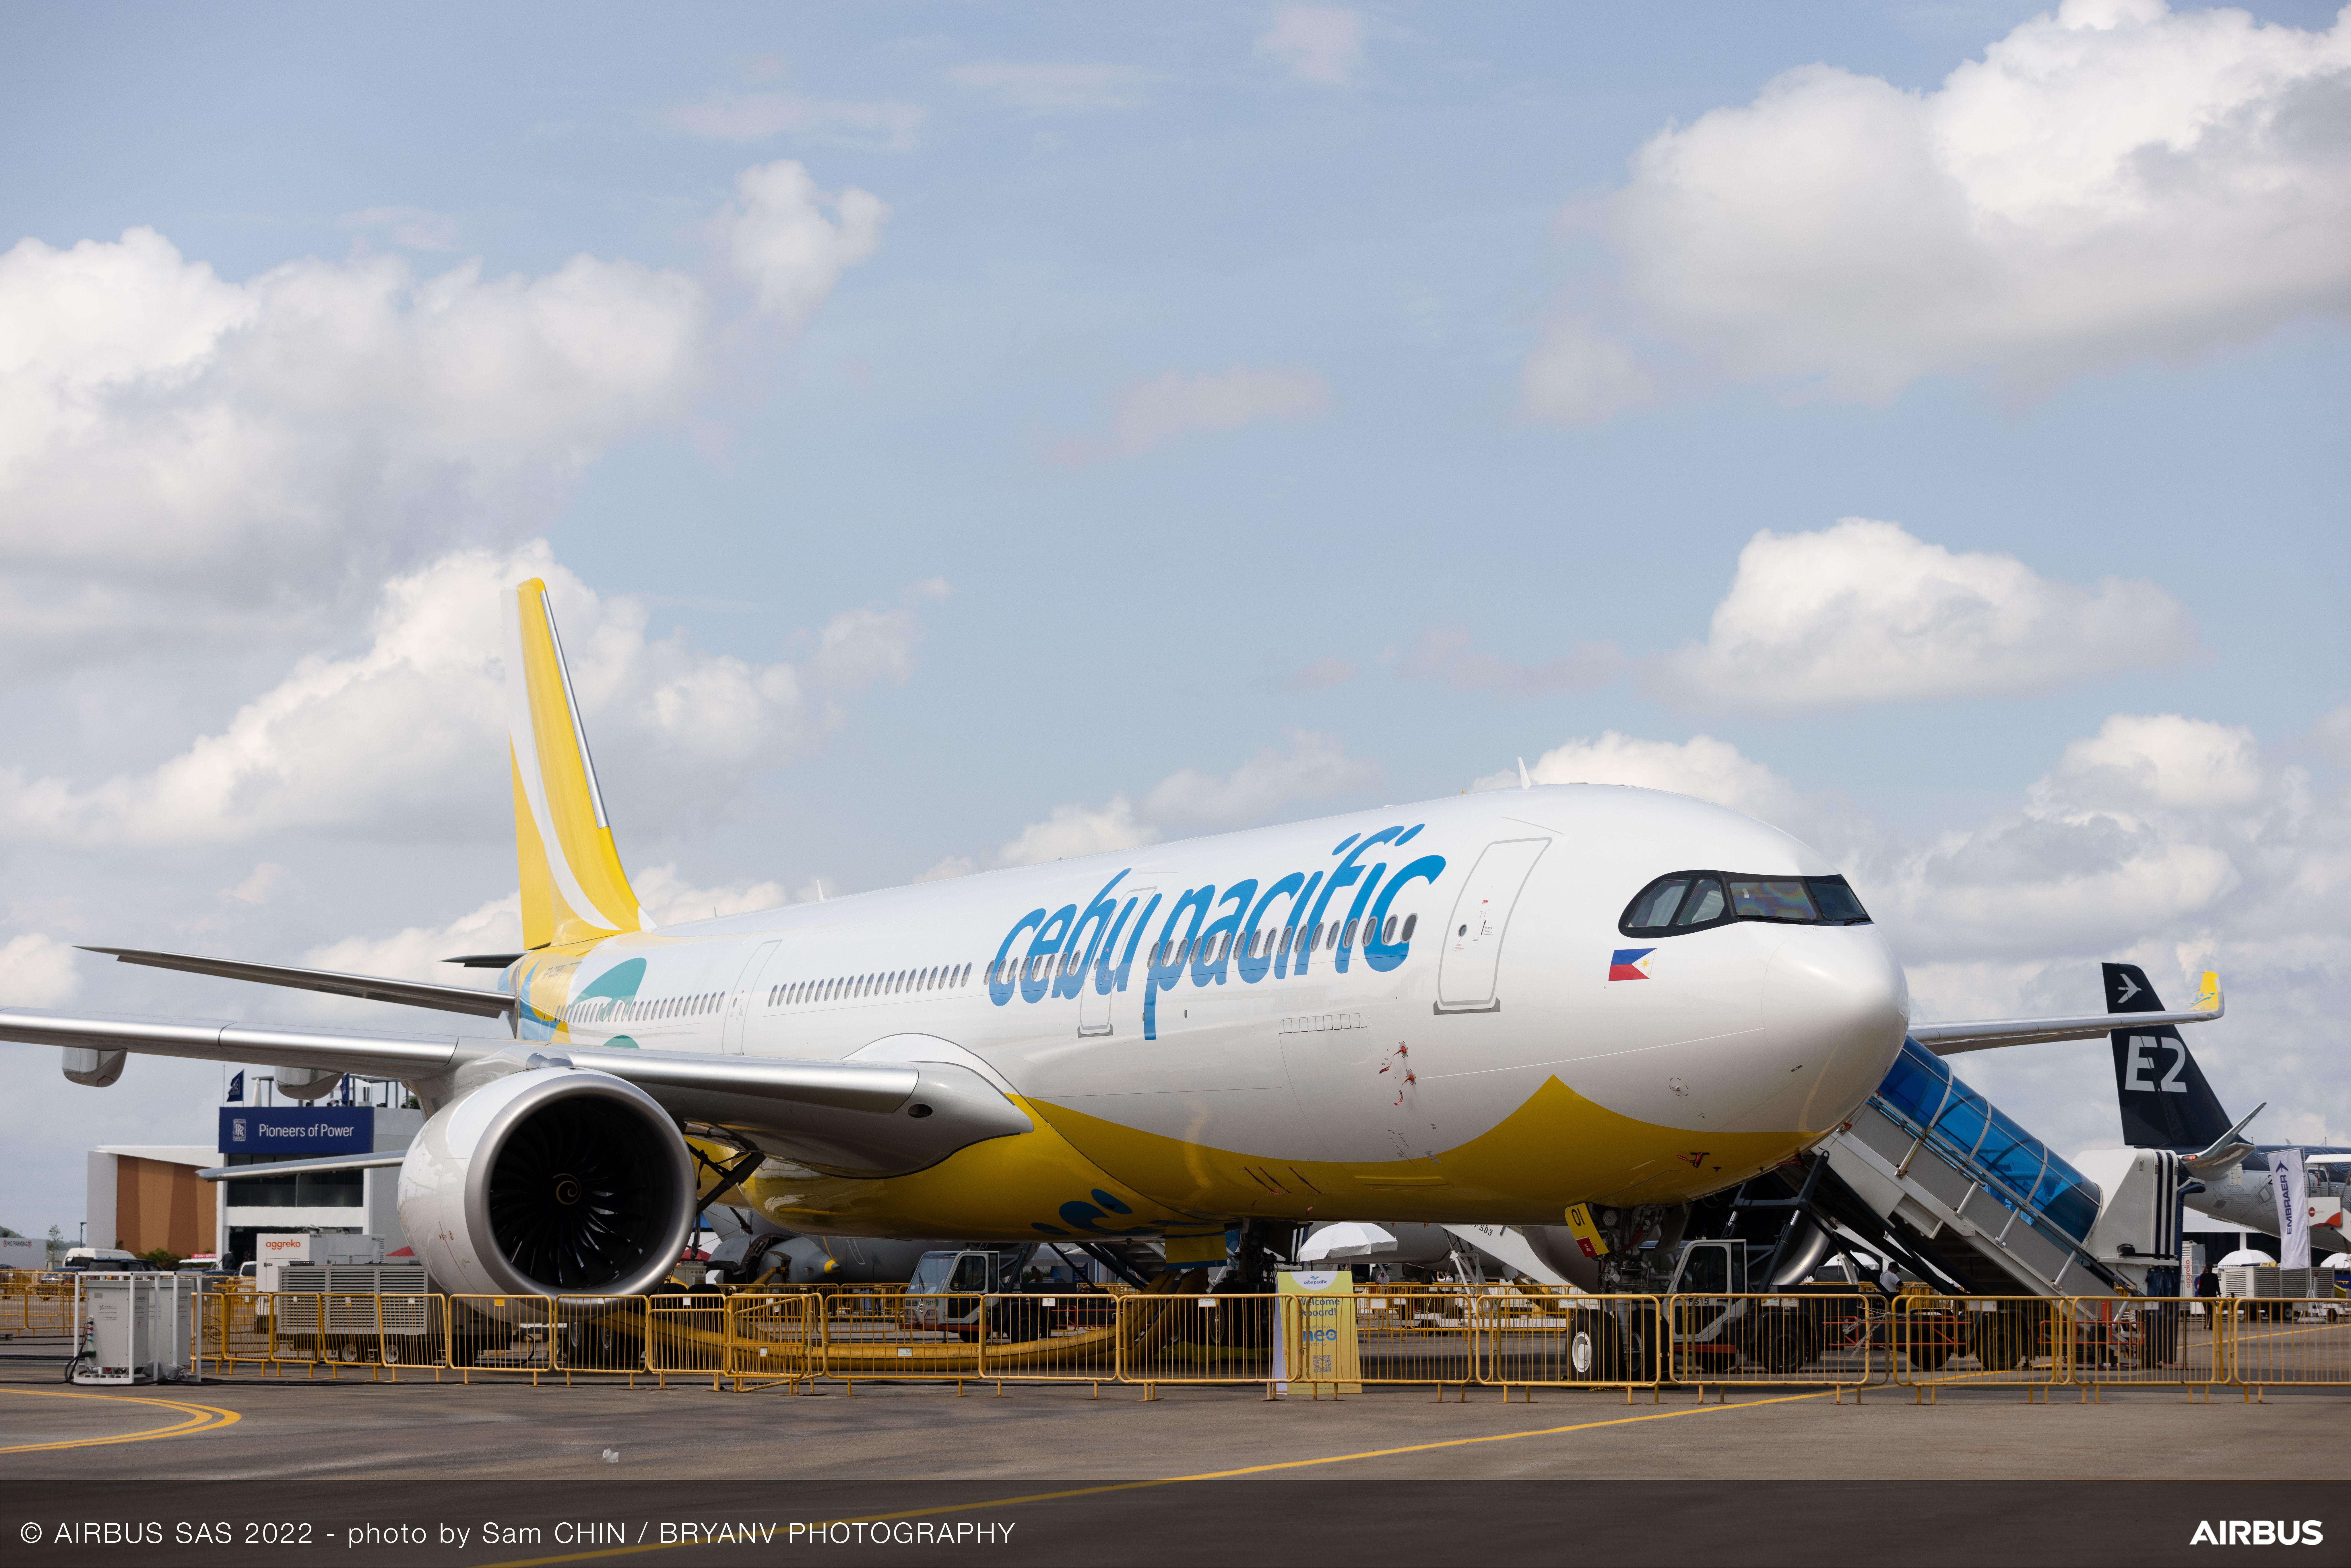 Singapore Airshow 2022 - A330-900 Cebu Pacific on static